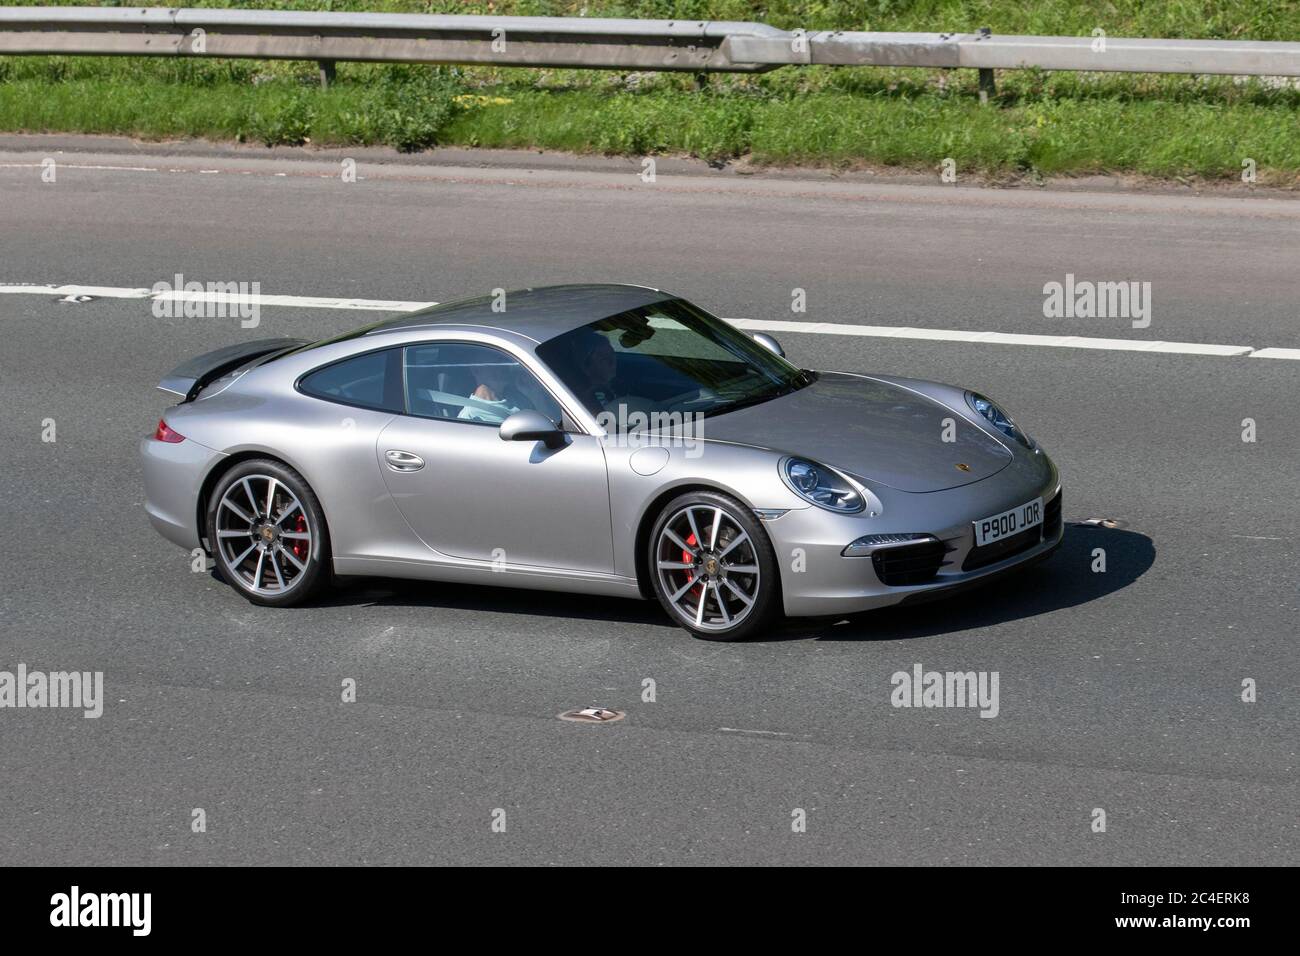 2012 silver grey Porsche 911 Carrera S S-A; Vehicular traffic moving vehicles, cars driving vehicle on UK roads, motors, motoring on the M6 motorway highway network. Stock Photo